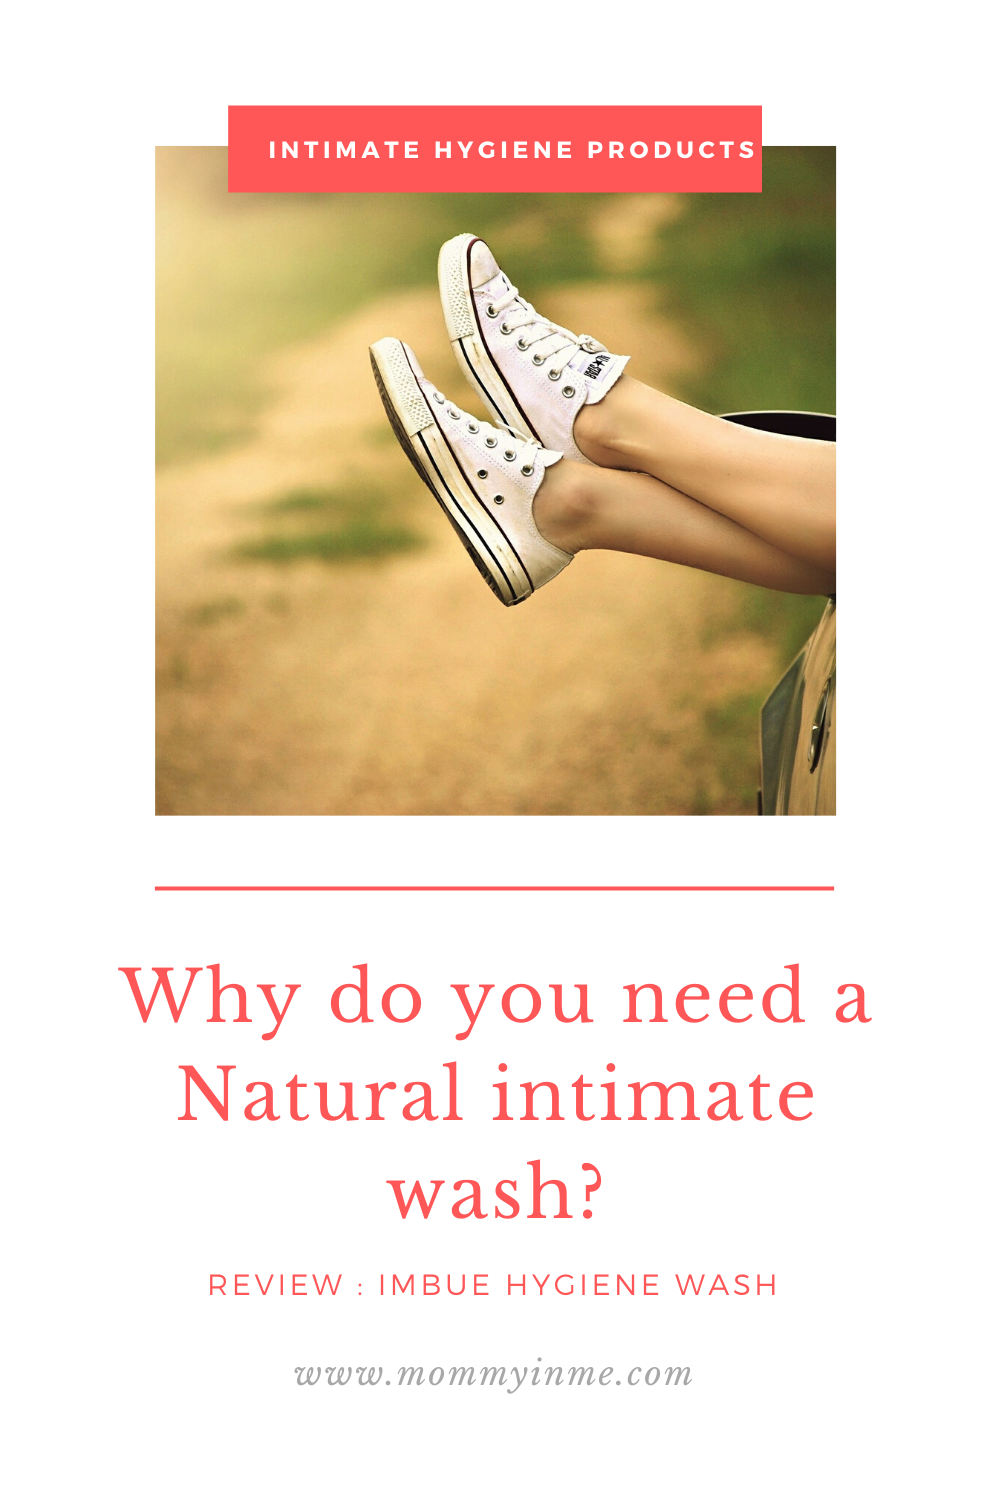 Do you need Female Hygiene Products? It is the Vulva and not Vagina that needs mild cleaning with Natural products like Imbue Intimate Hygiene Wash #Femininewash #imbuewash #hygienewash #vaginalwash #intimatewash #intimateproducts #intimatefoam